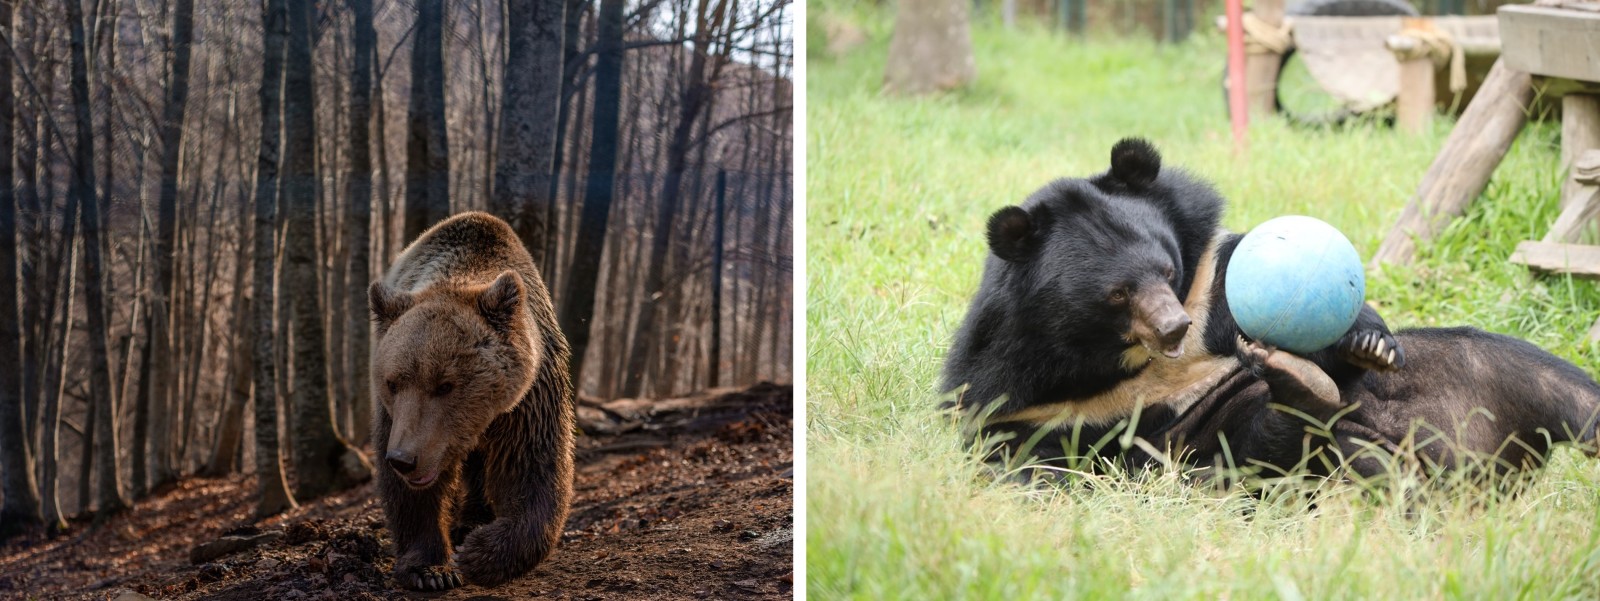 Two photos next to each other - on the left is a brown bear walking through a forest. On the right is a moon bear playing with a ball.